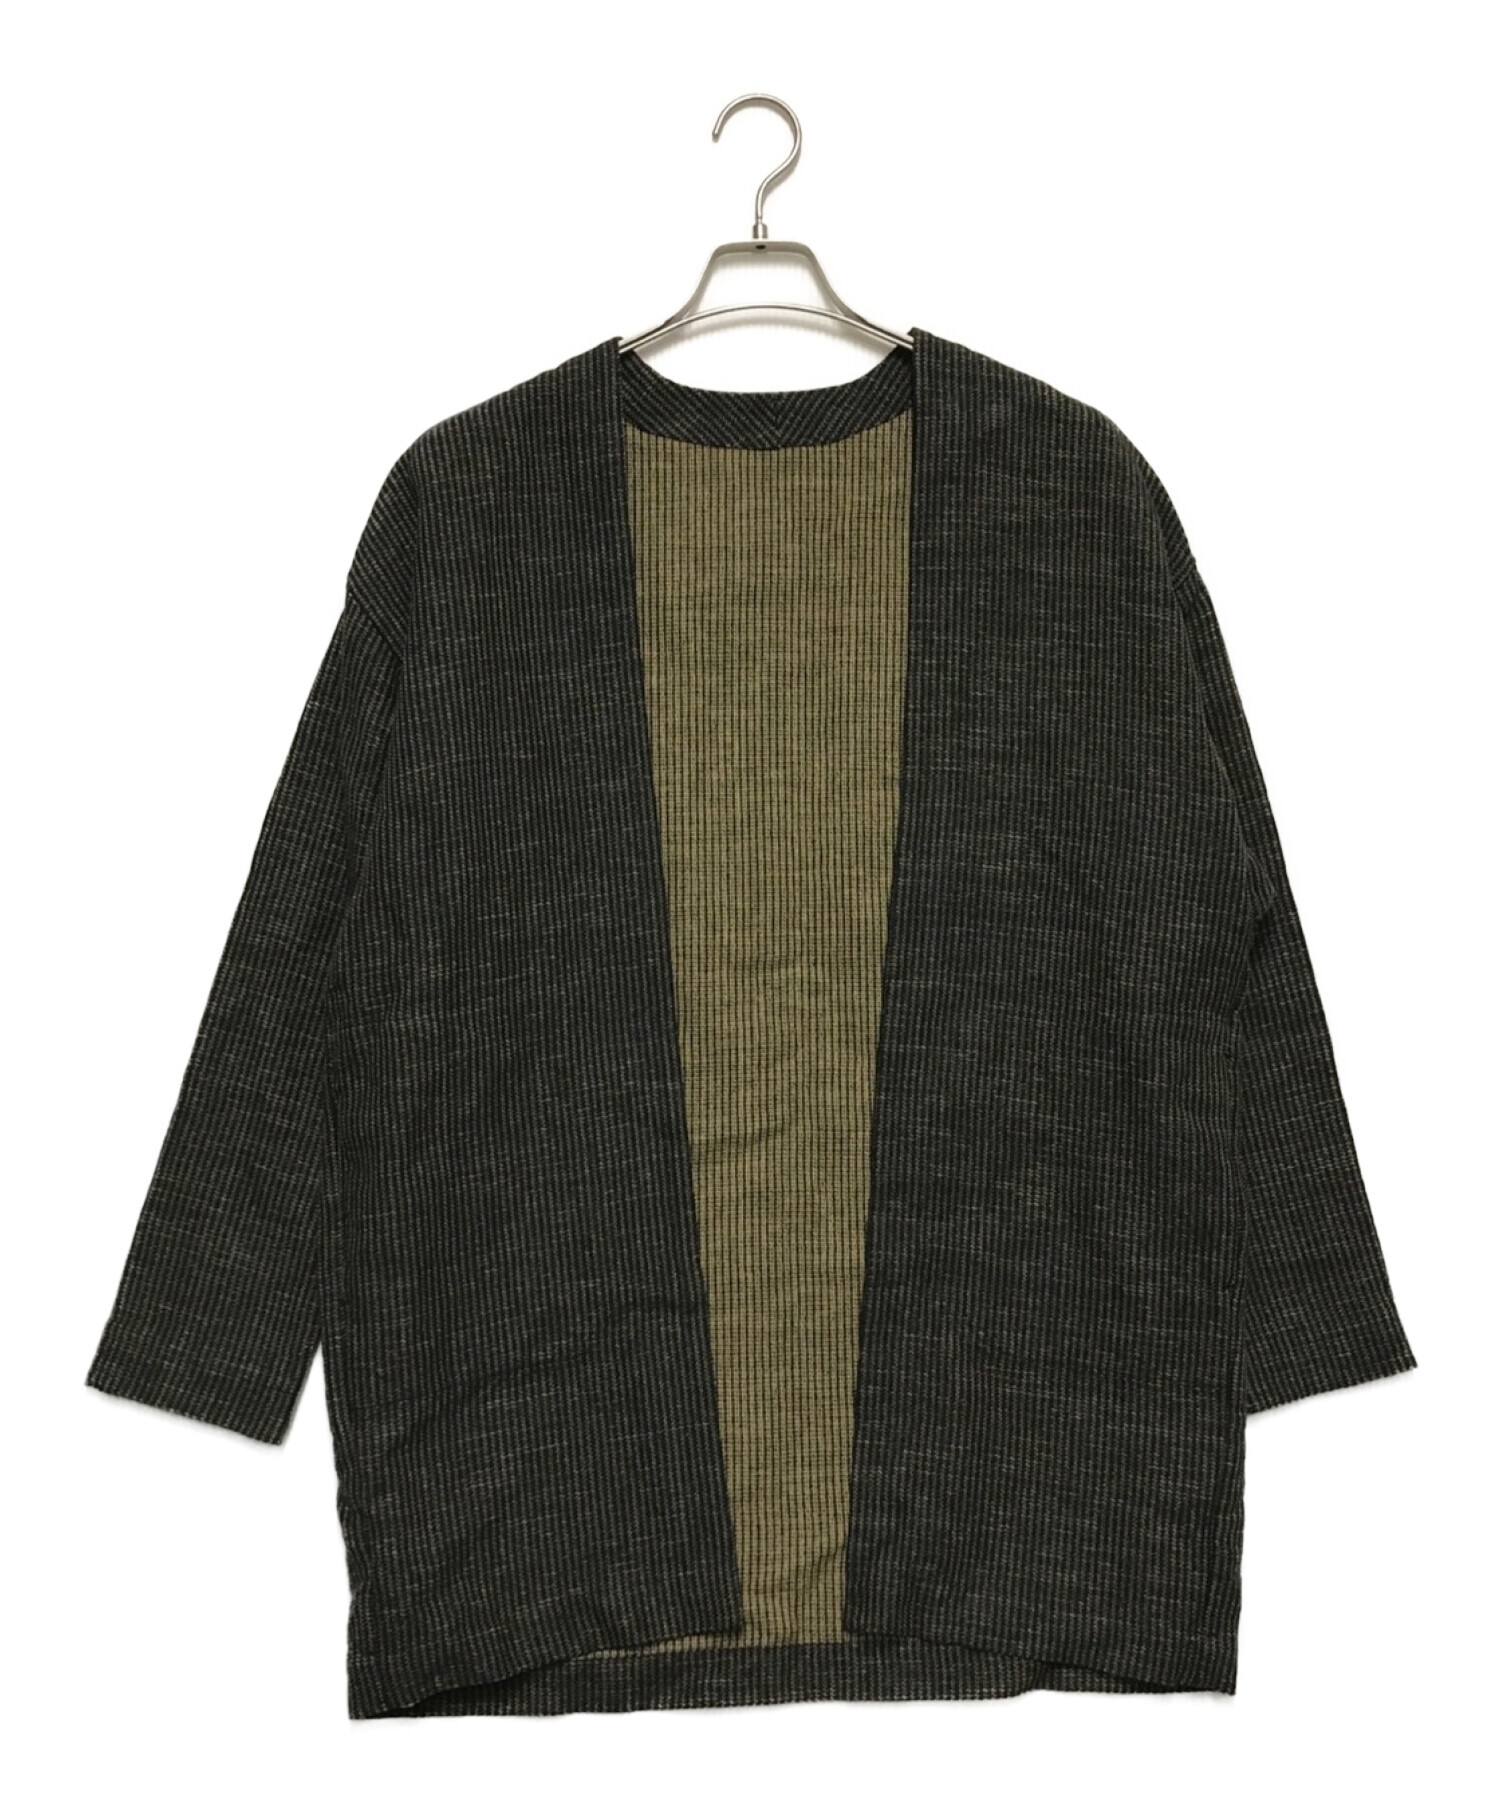 ARTS&SCIENCE Ethnic Cardigan Middle 3-